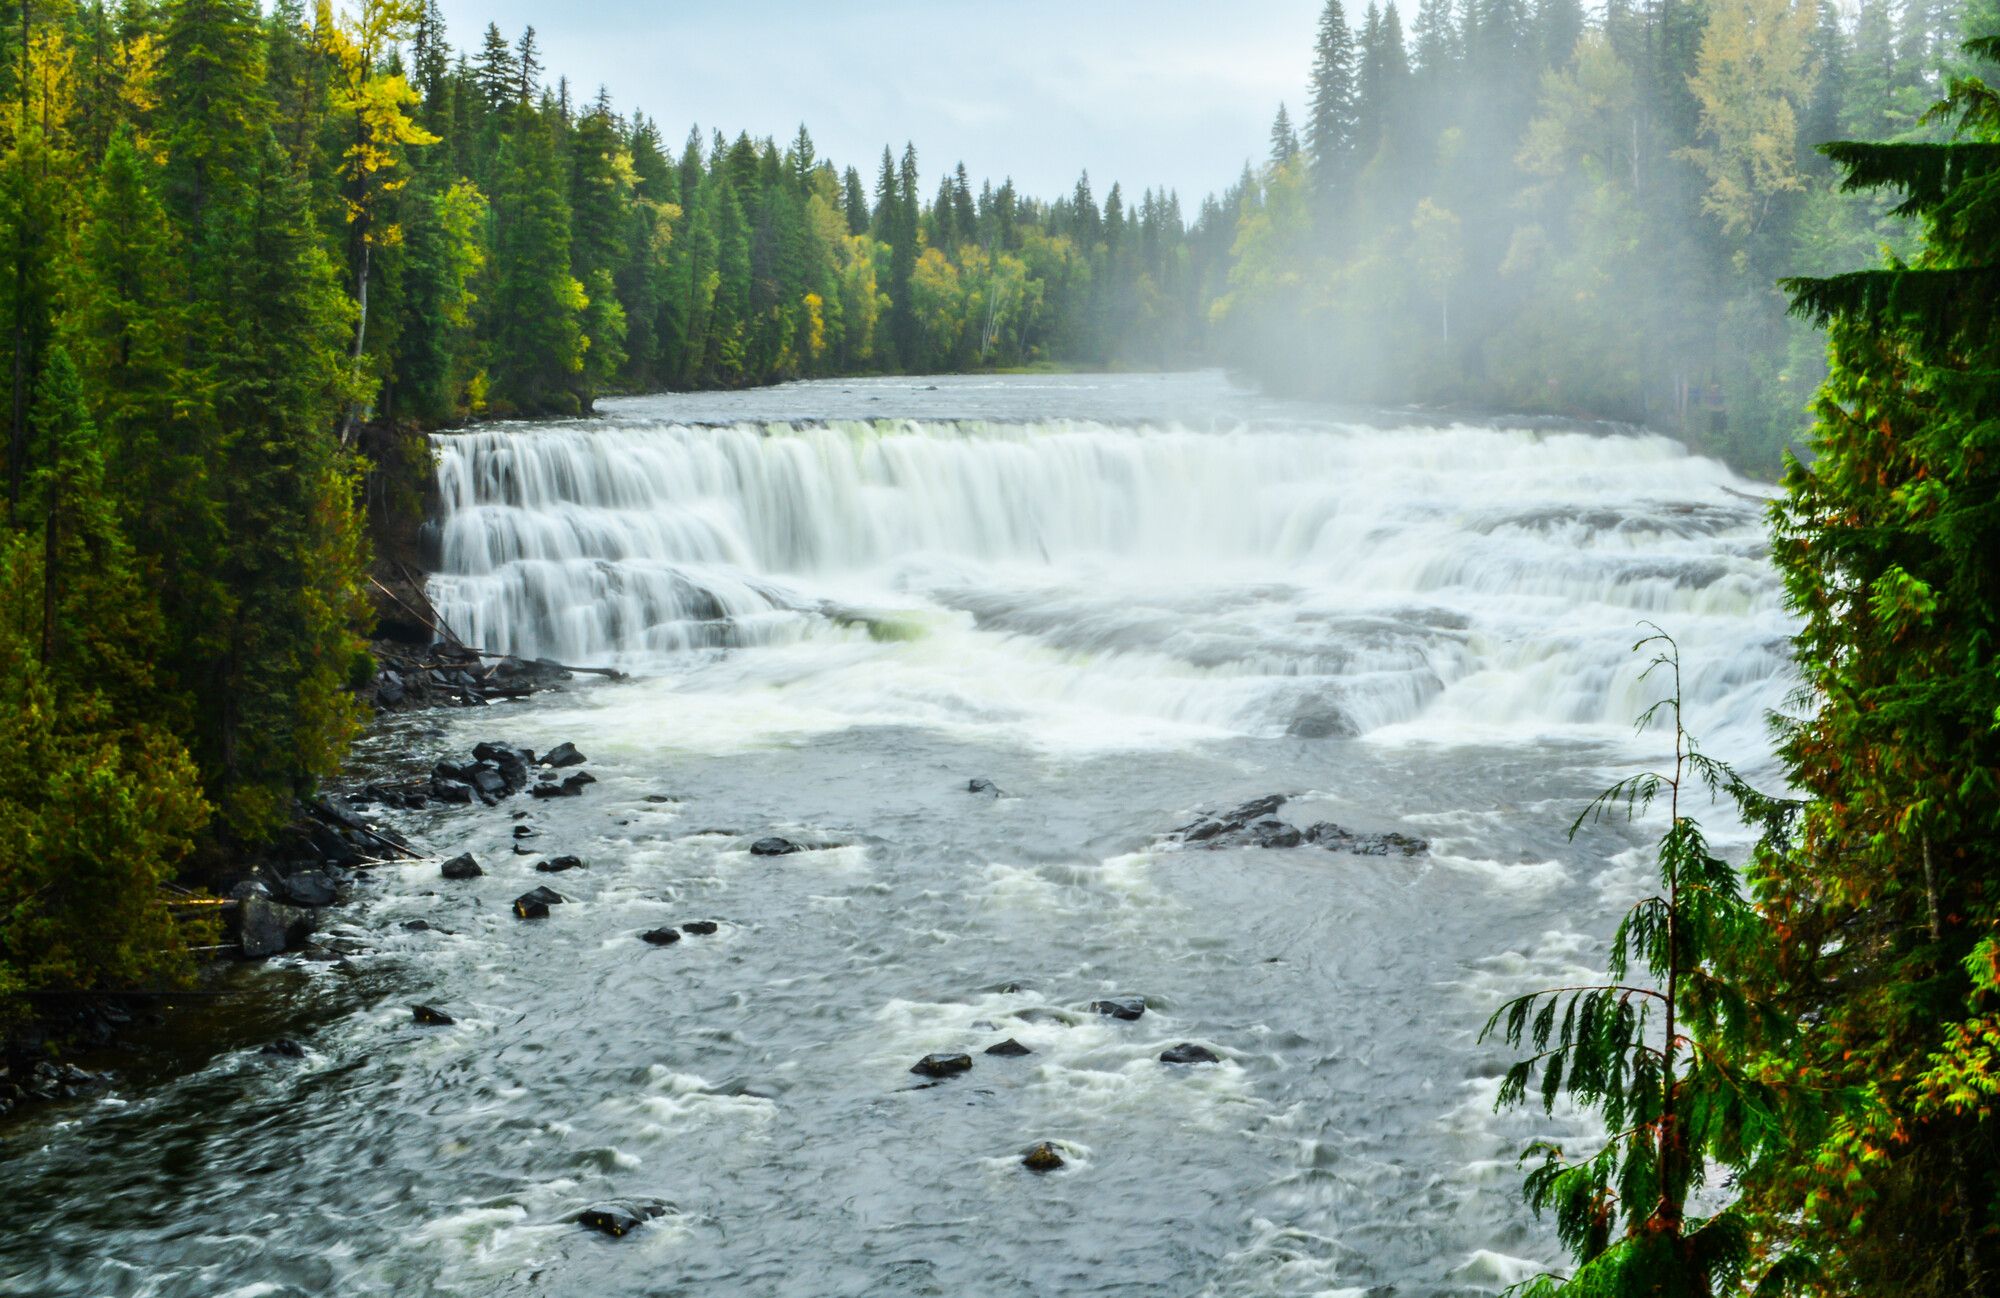 Mist rises above the cascading waters of the horseshoe shape of Dawson Falls in the fall. Wells Gray Park.